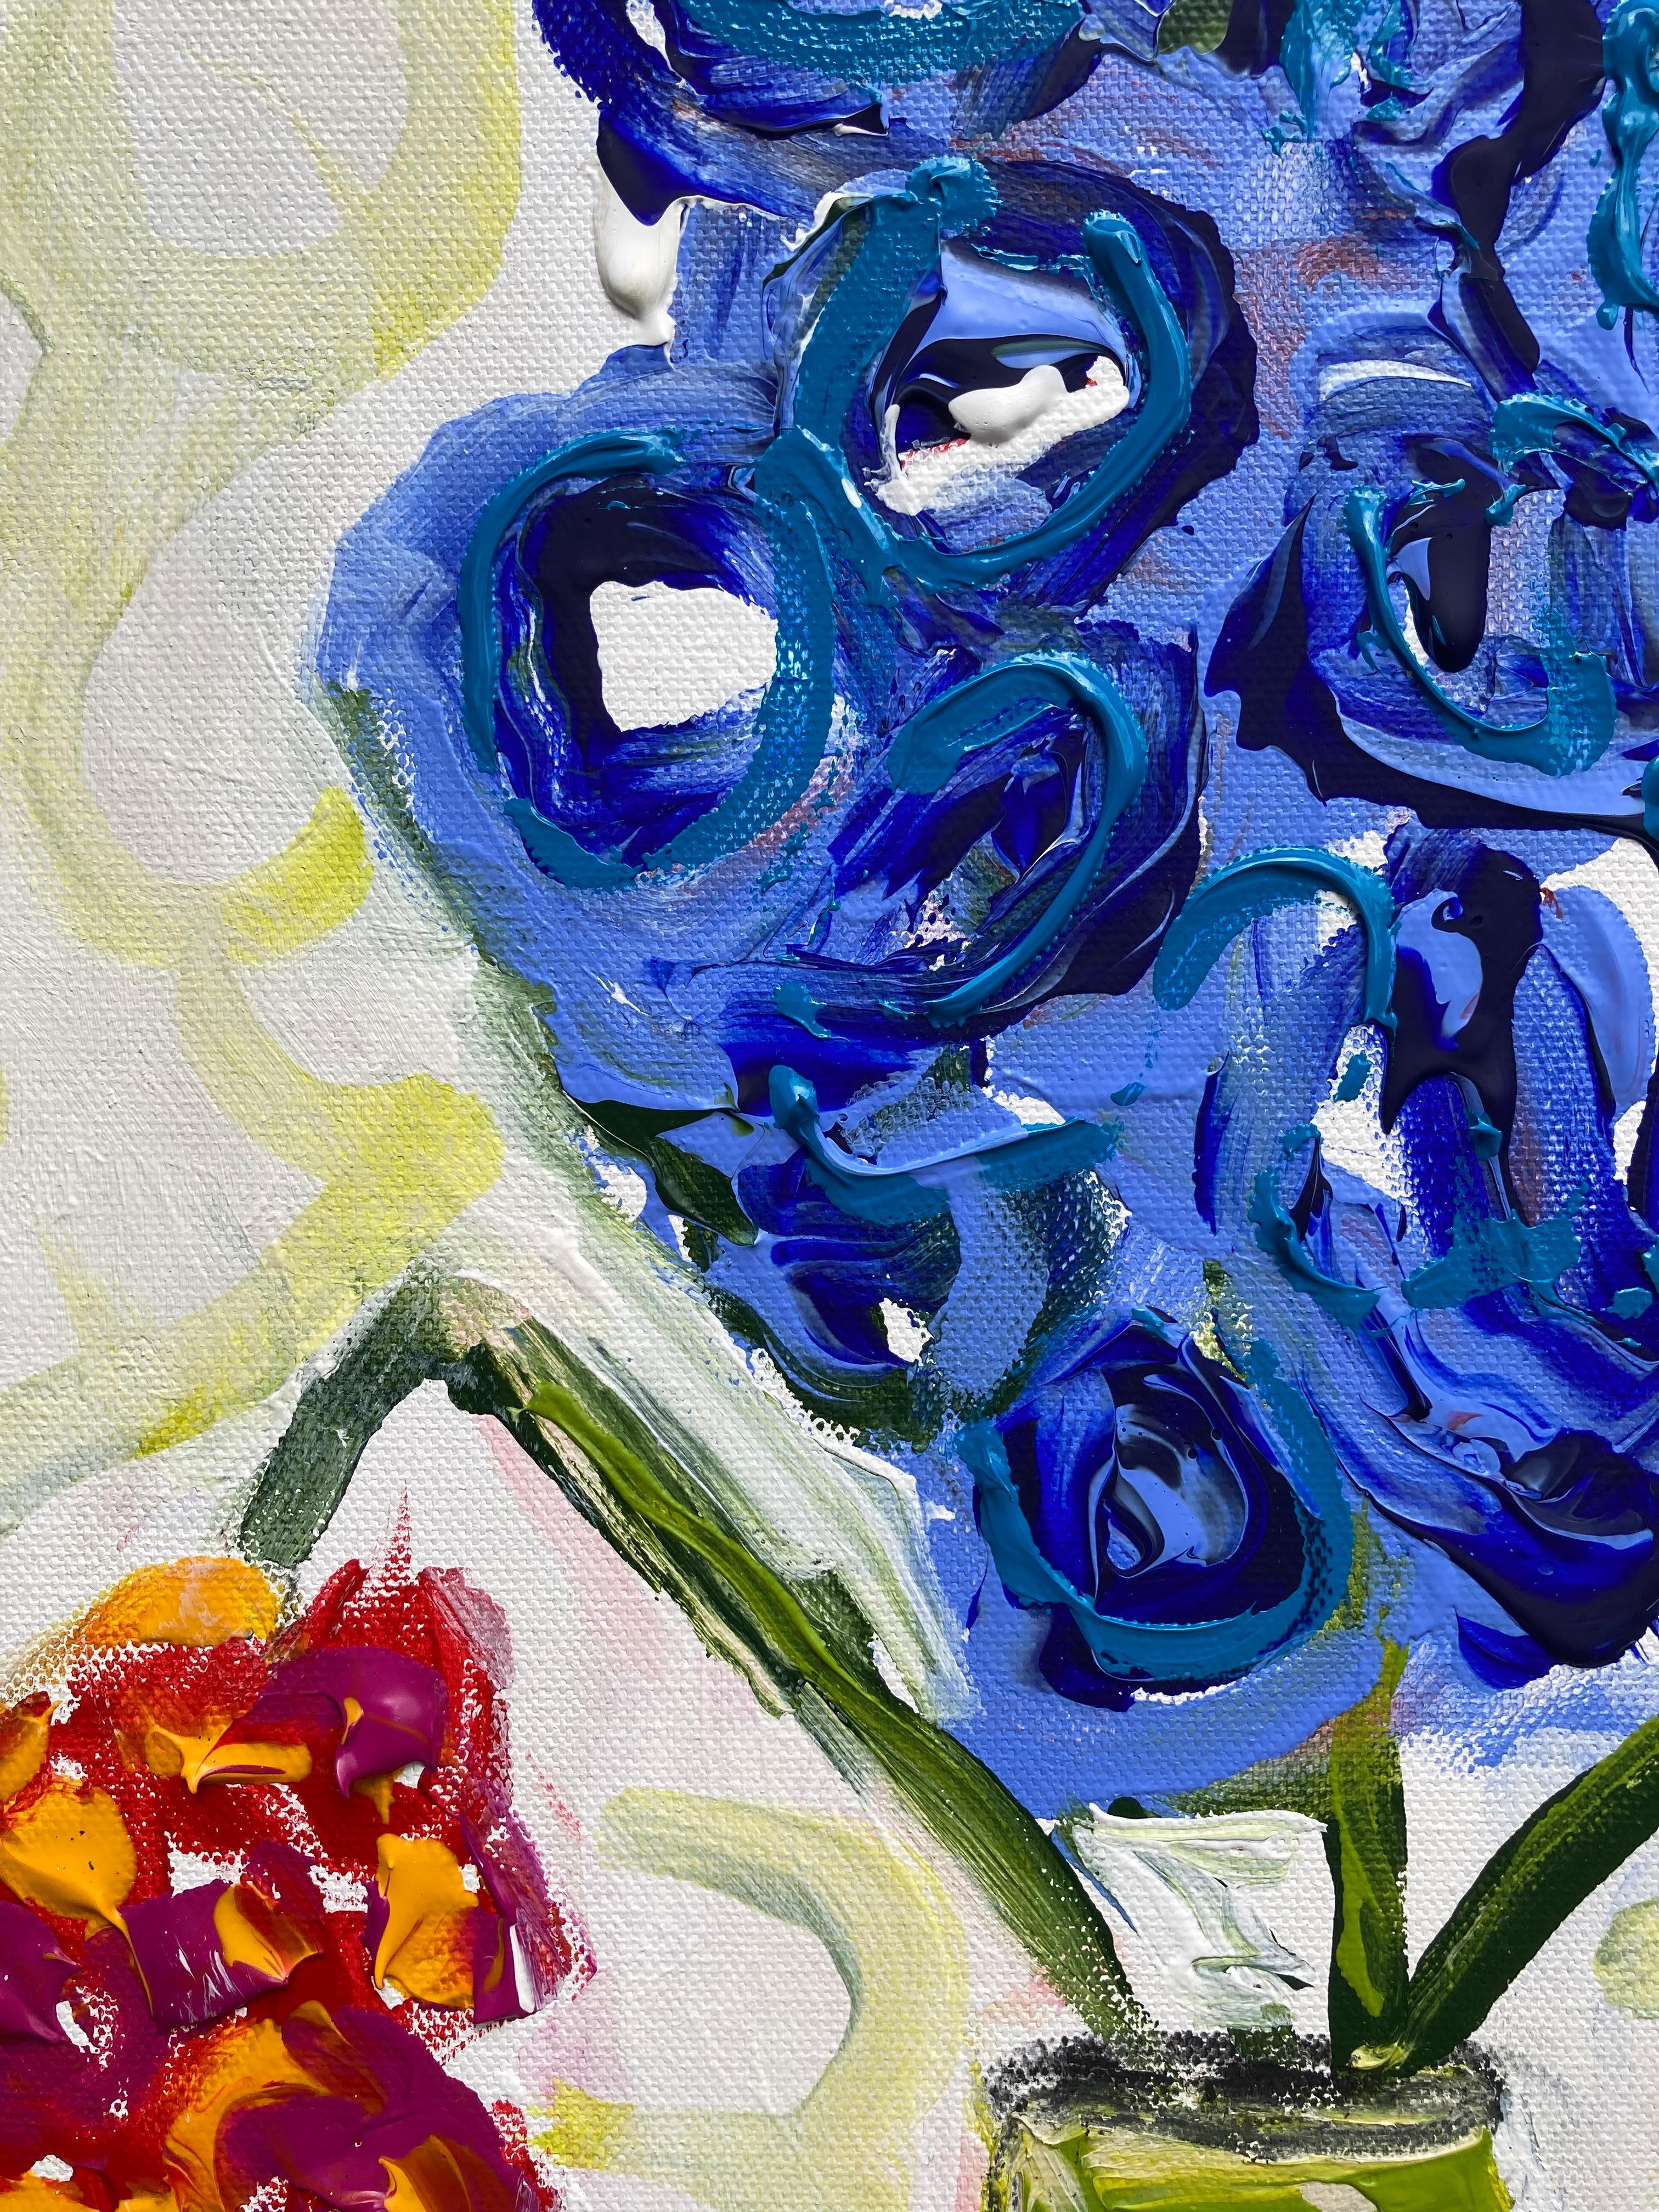 Artist’s Statement: “I have been an abstract painter for over 30 years, and I can't exactly say what caused me to one night go to the studio and paint flowers, of all things. But of course, the 'template' of flowers in a vase is really just a basis,